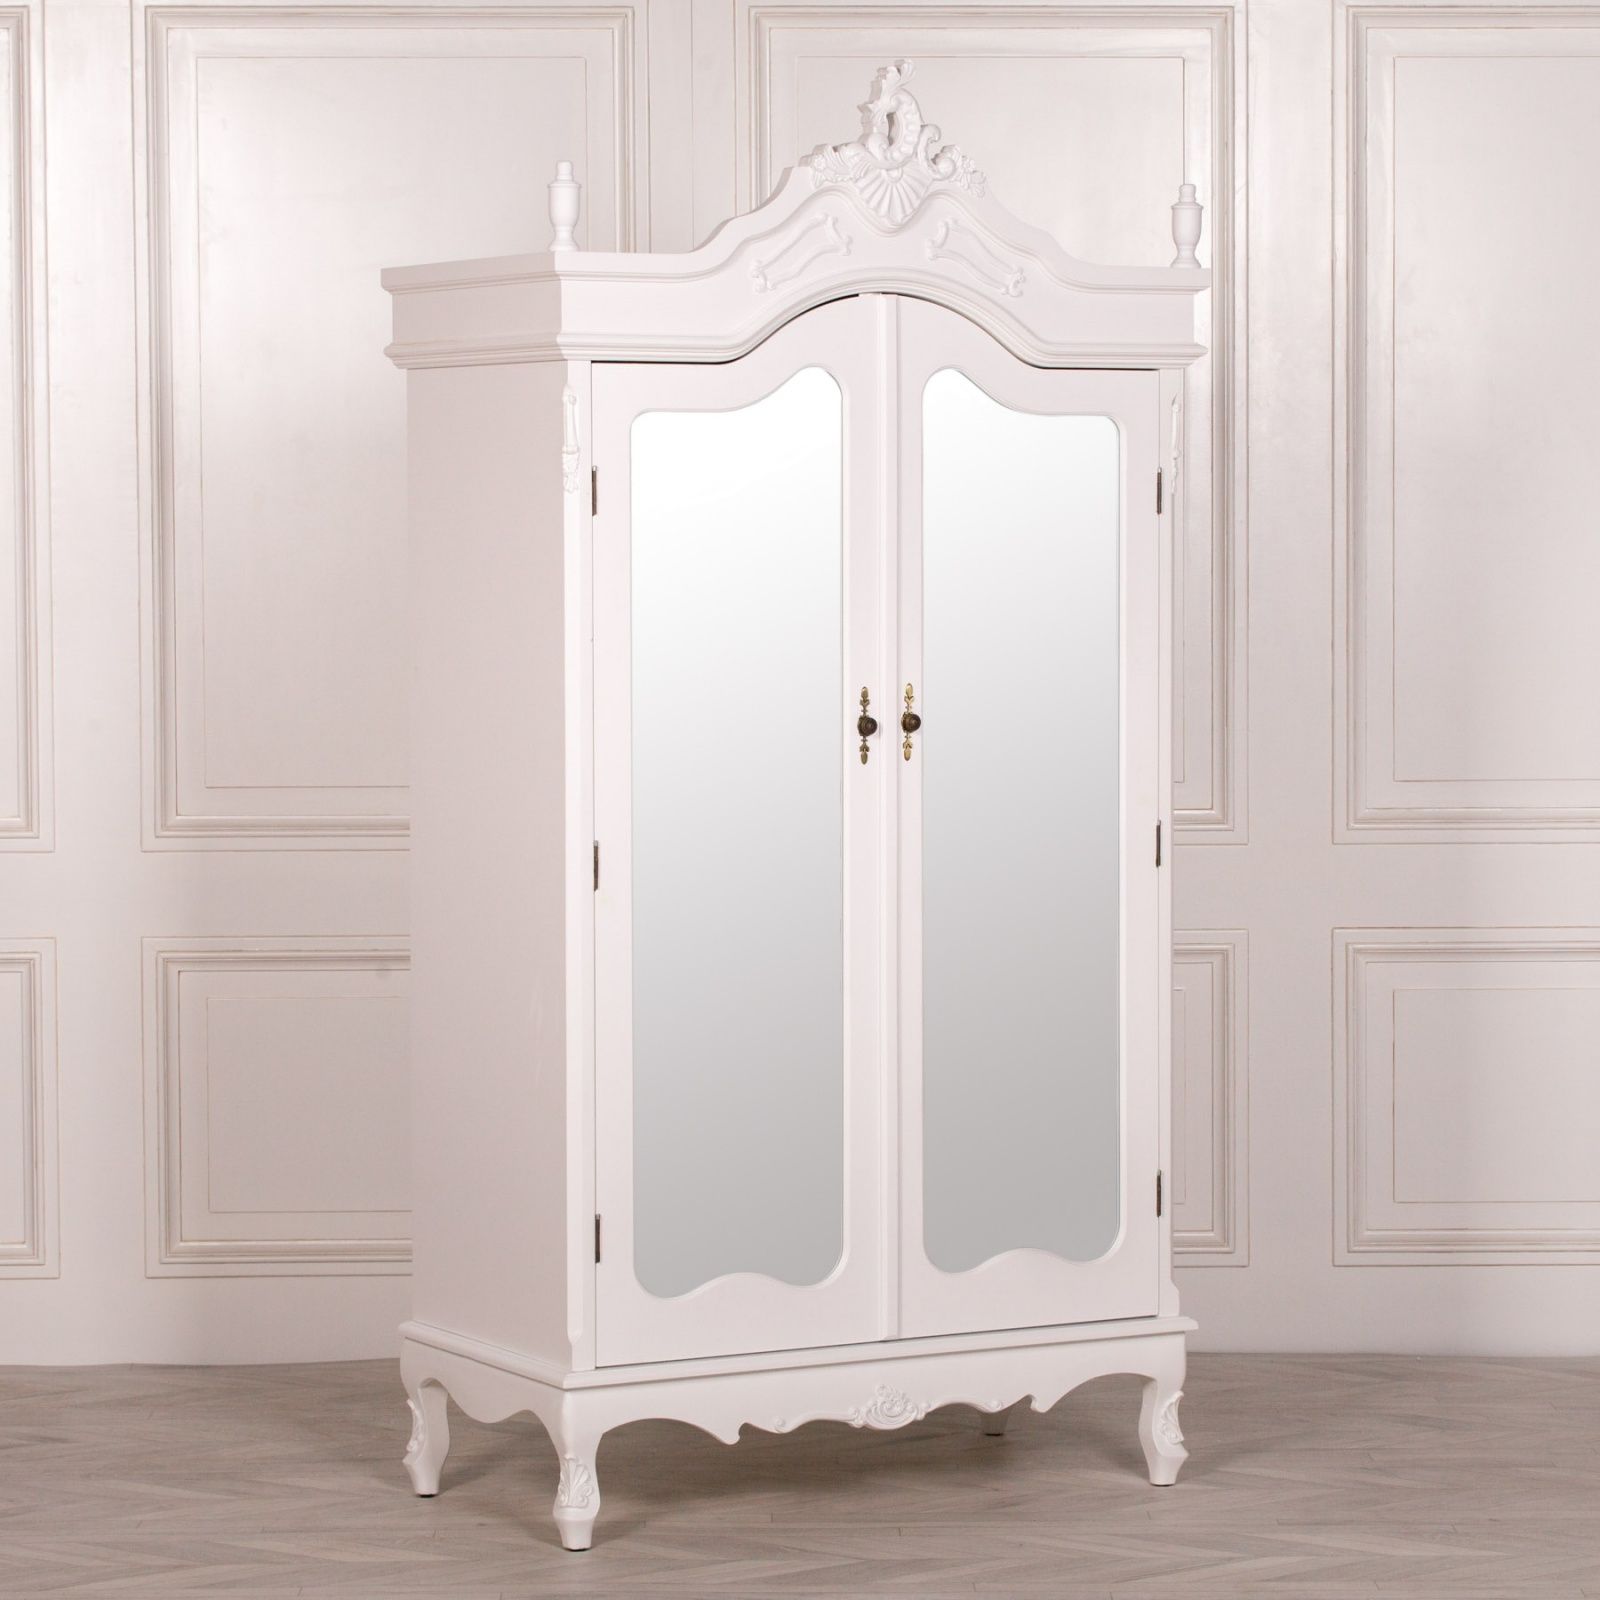 French Style Wardrobe White Mirrored Double Armoire Intended For French Style Wardrobes (View 7 of 15)